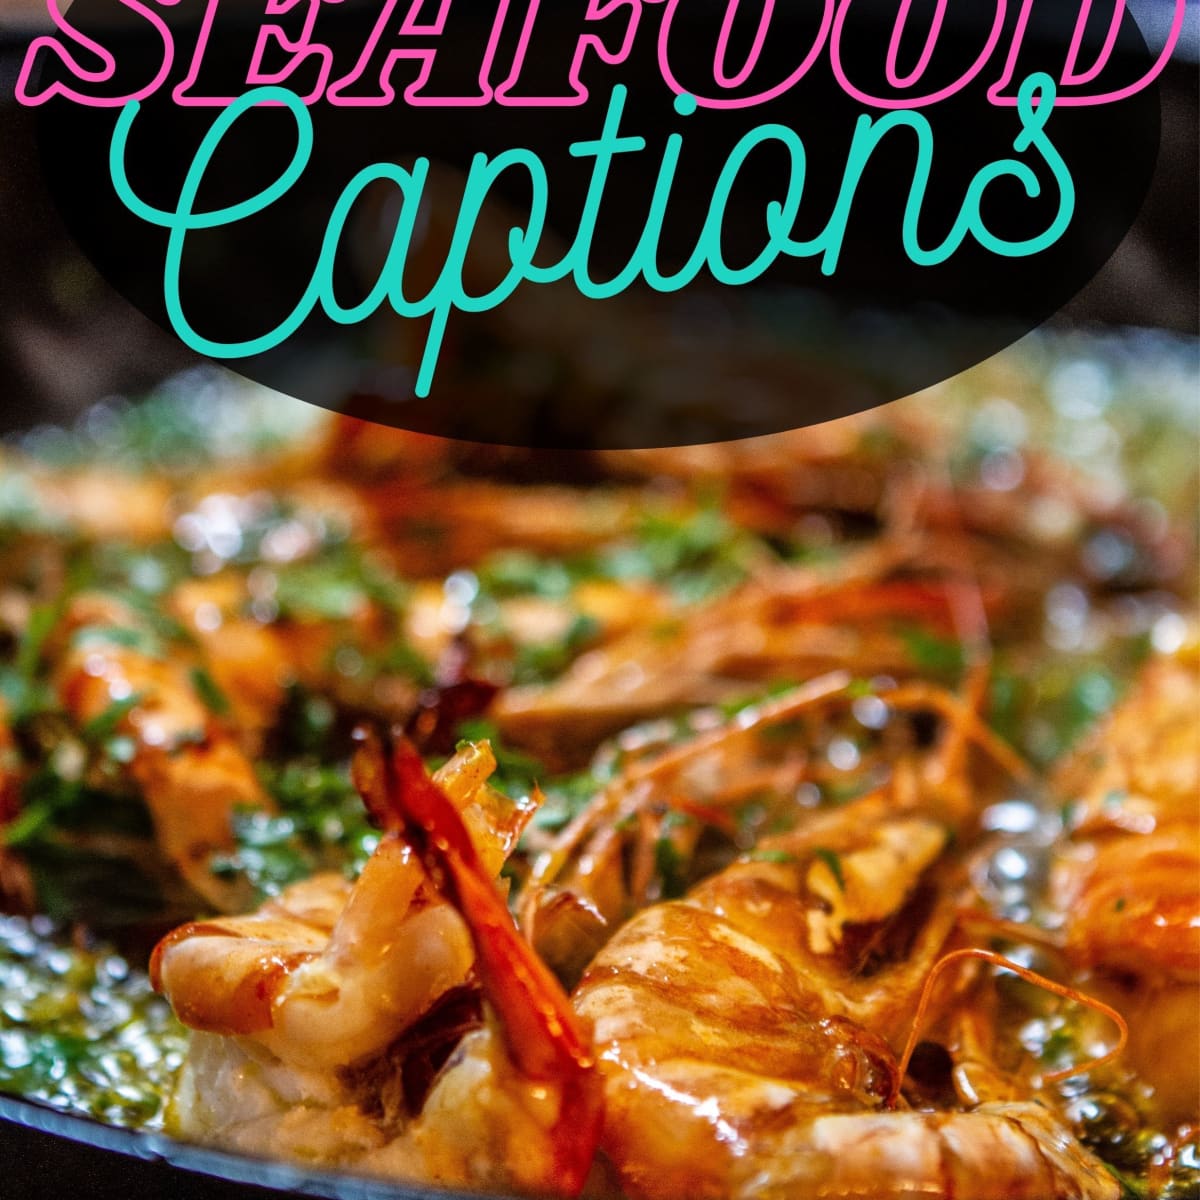 150+ Seafood Quotes and Caption Ideas for Instagram - TurboFuture